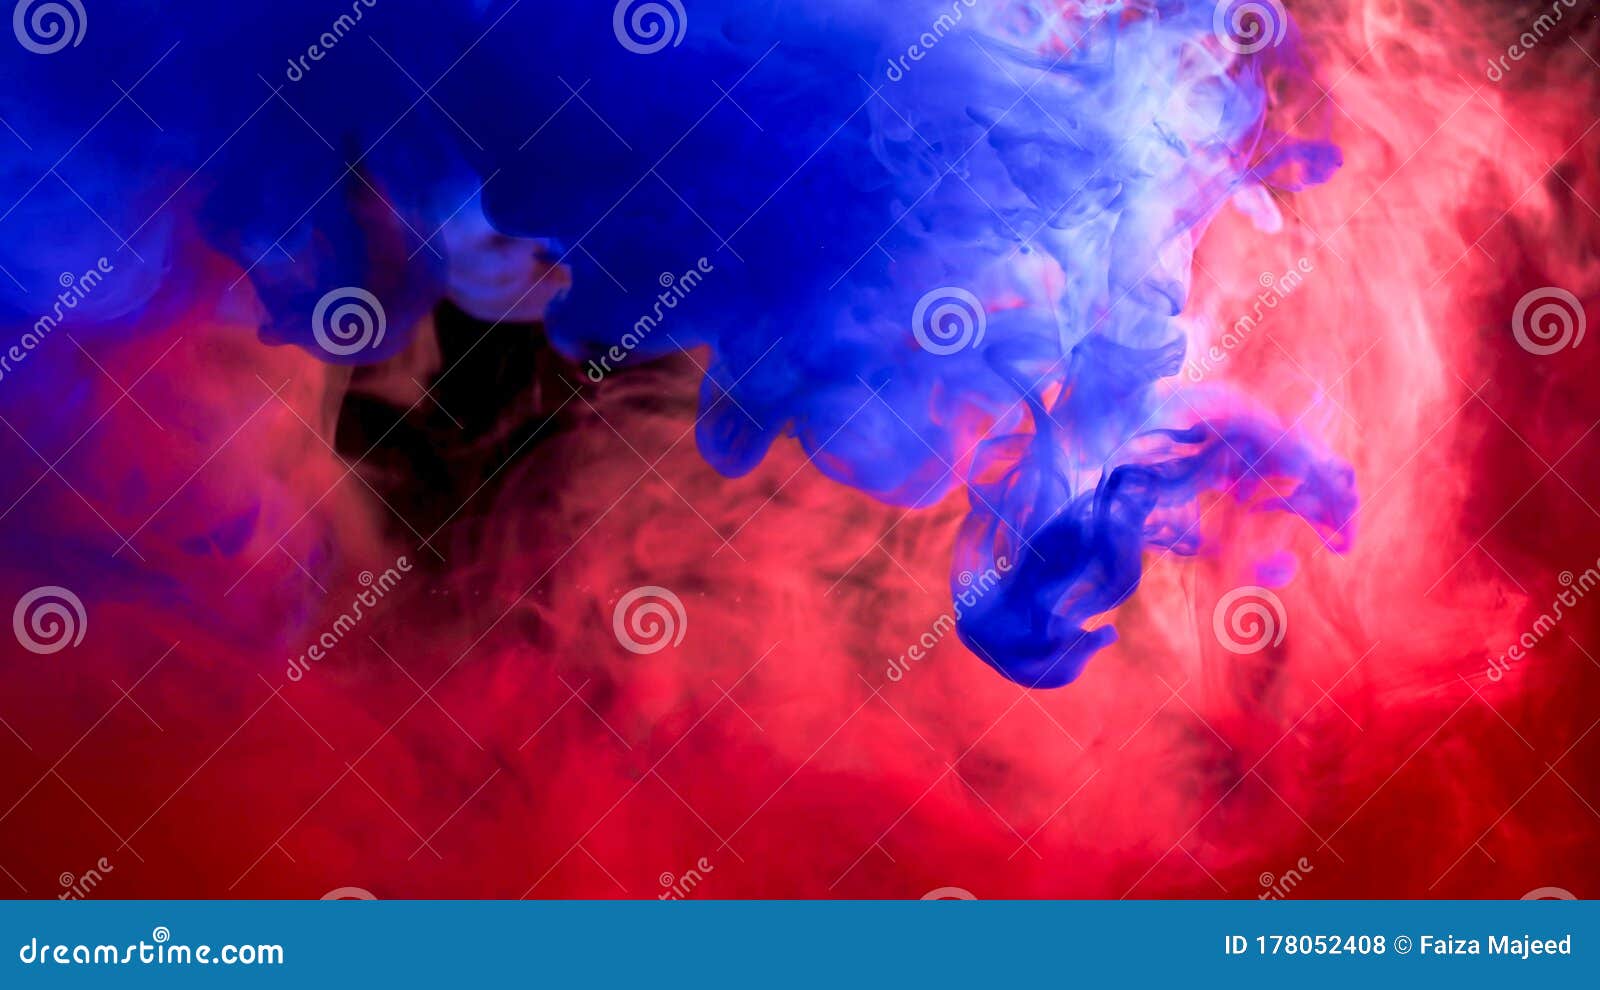 Motion Color Drop in Water,Ink Swirling in ,Colorful Ink Abstraction ...